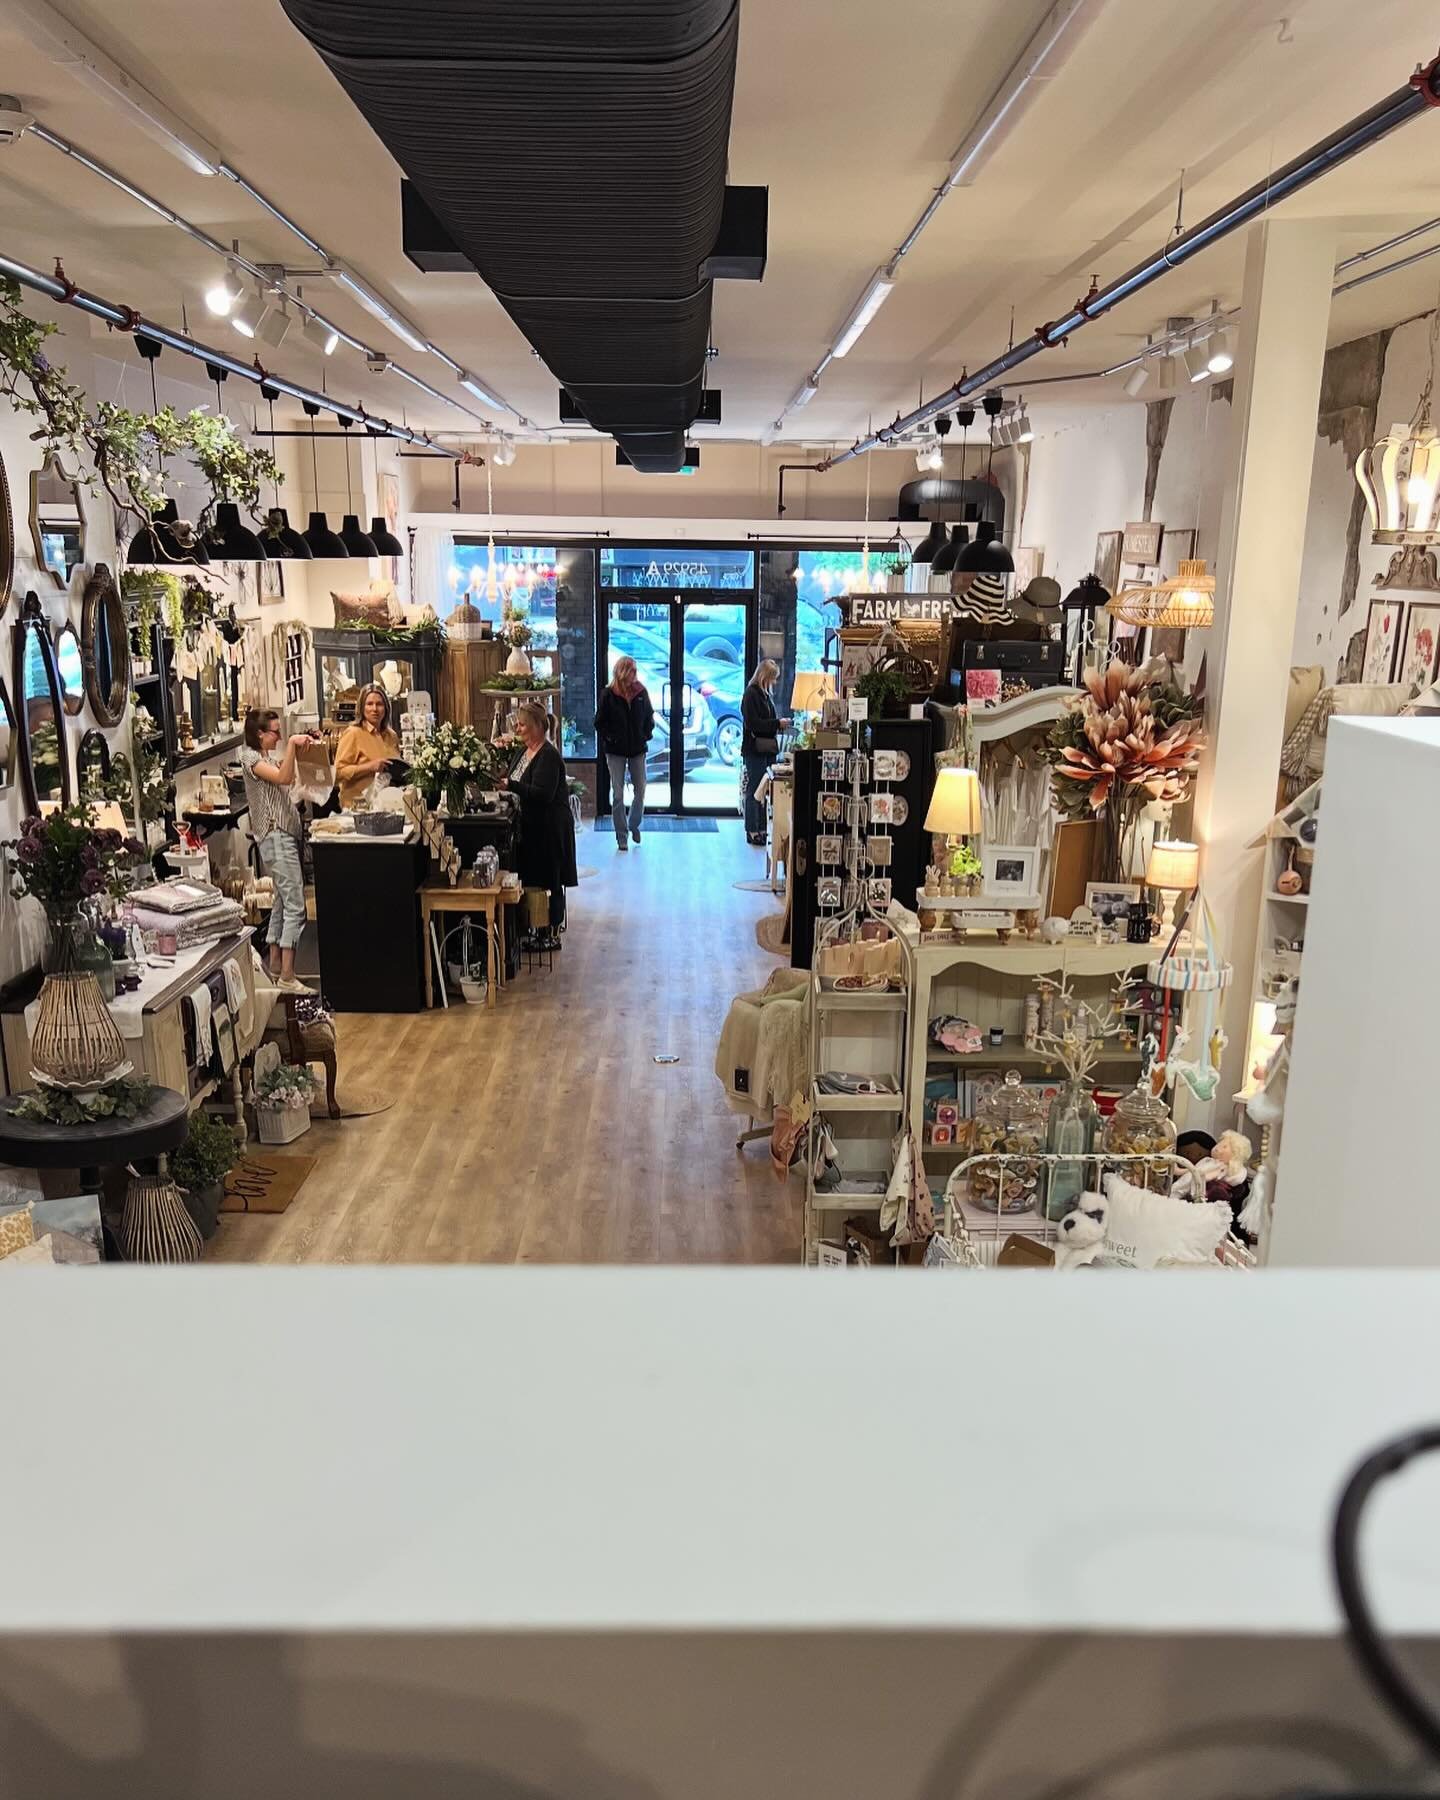 We stopped by @creeksidehomedecor new location today &amp; absolutely love it (no surprise there!)
They moved just down Wellington, closer to 5 corners and right next to @zebookman after being in there previously location for 20 years! Now they&rsquo